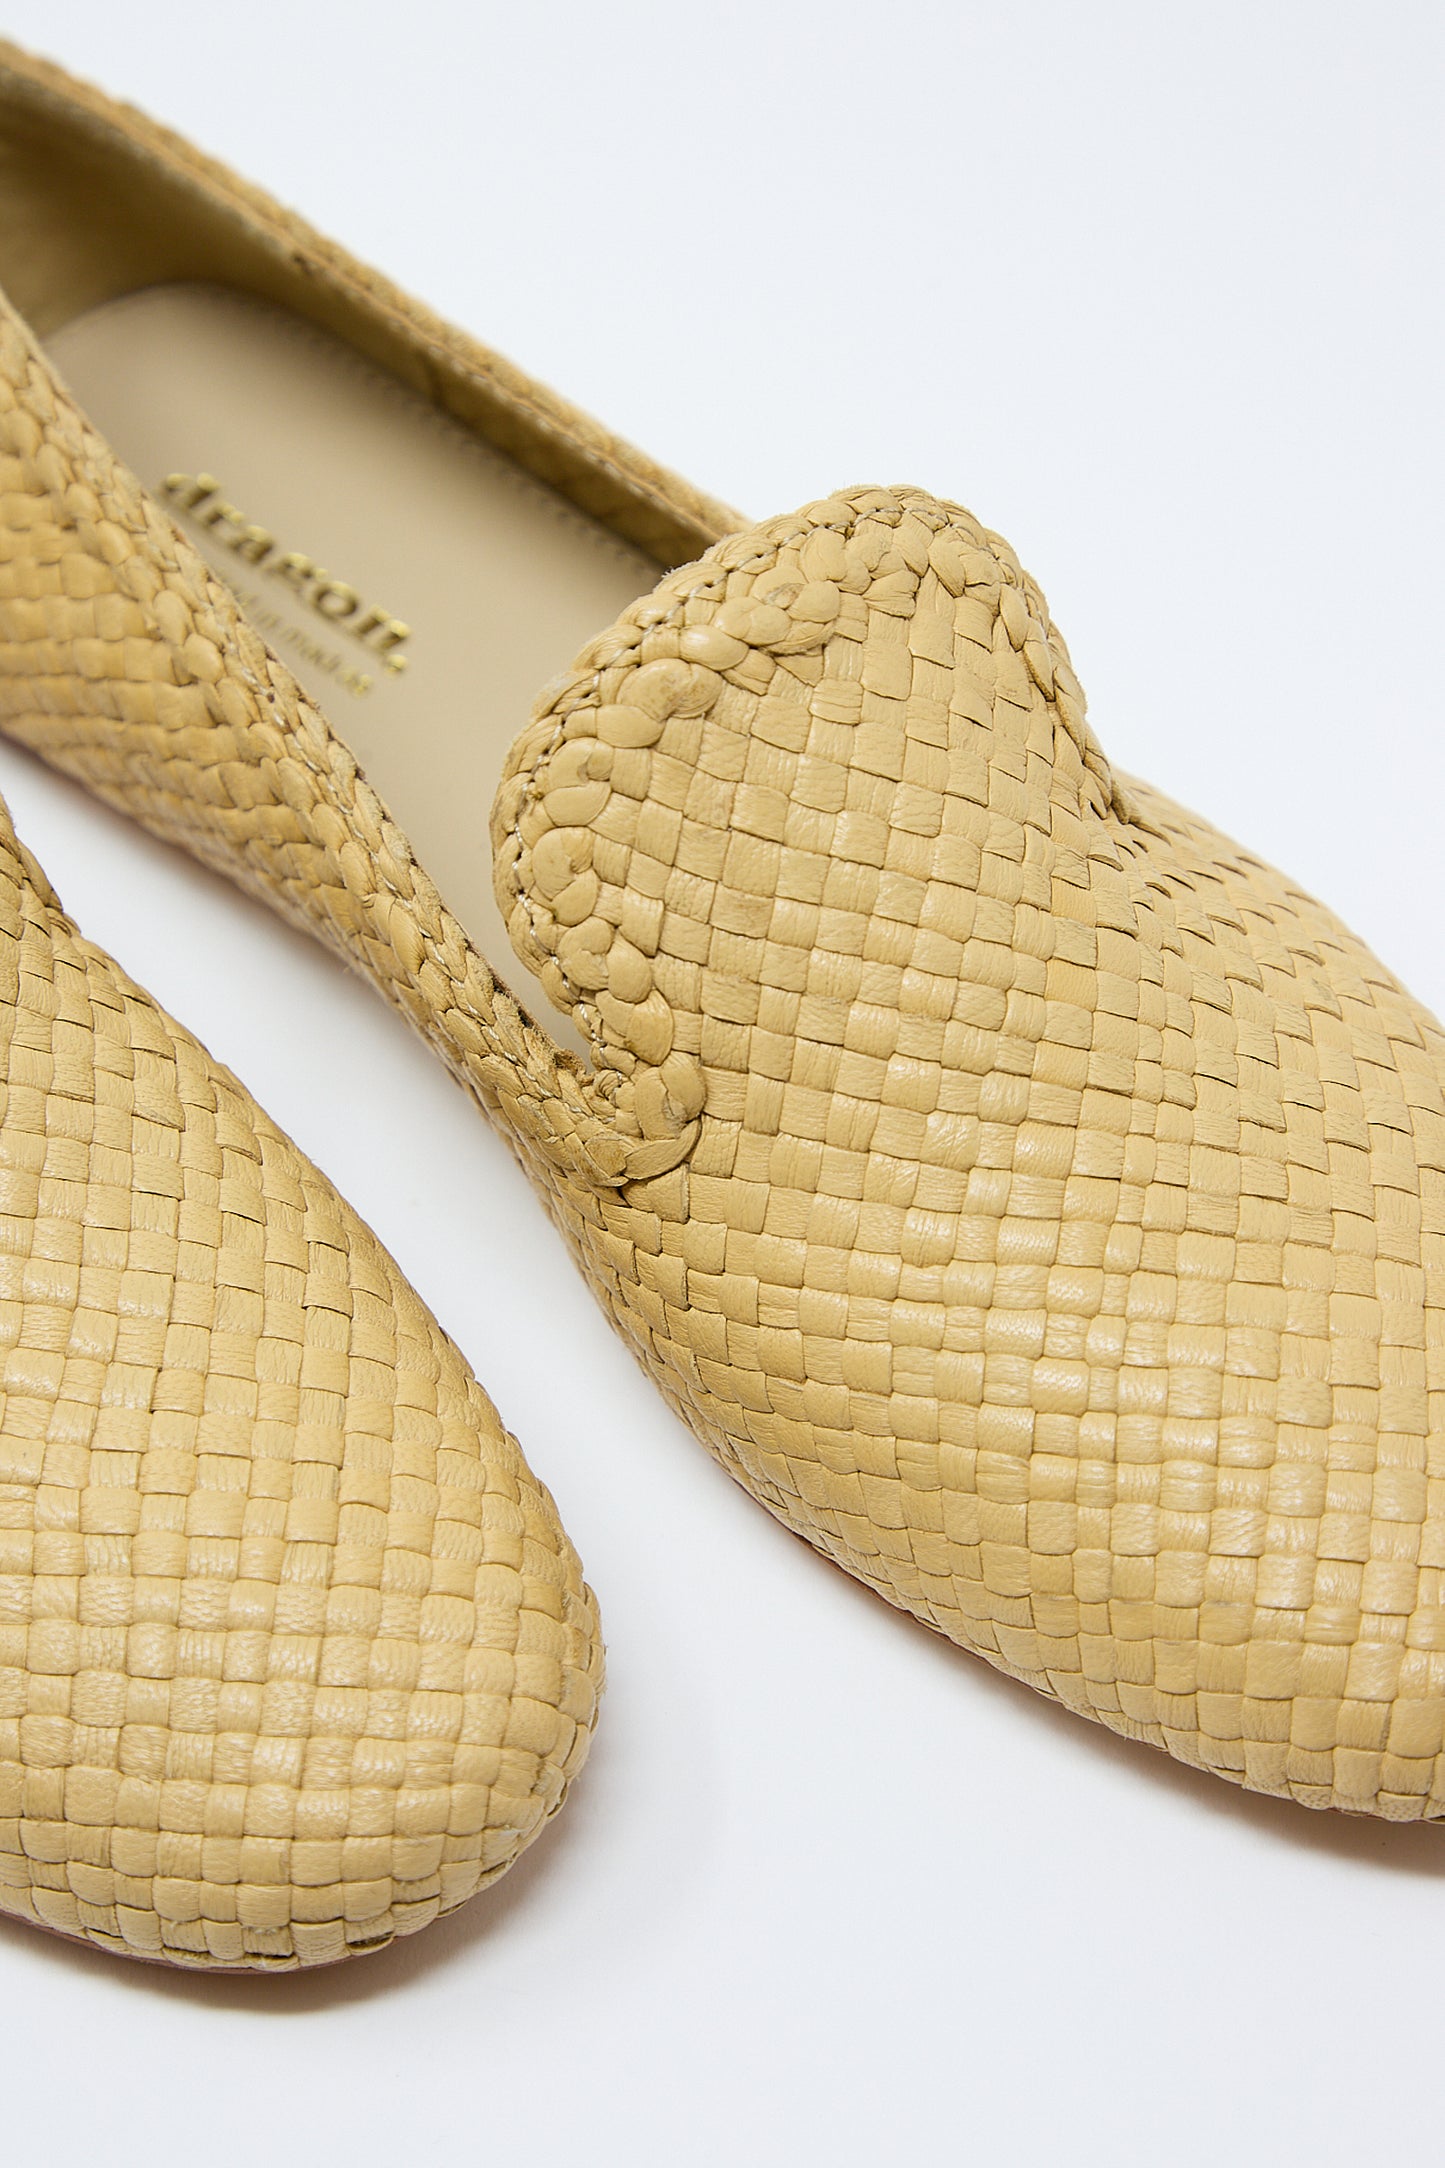 A close-up of a pair of Dragon Diffusion Damas Slipper in Natural handwoven tan goatskin leather loafers against a white background.